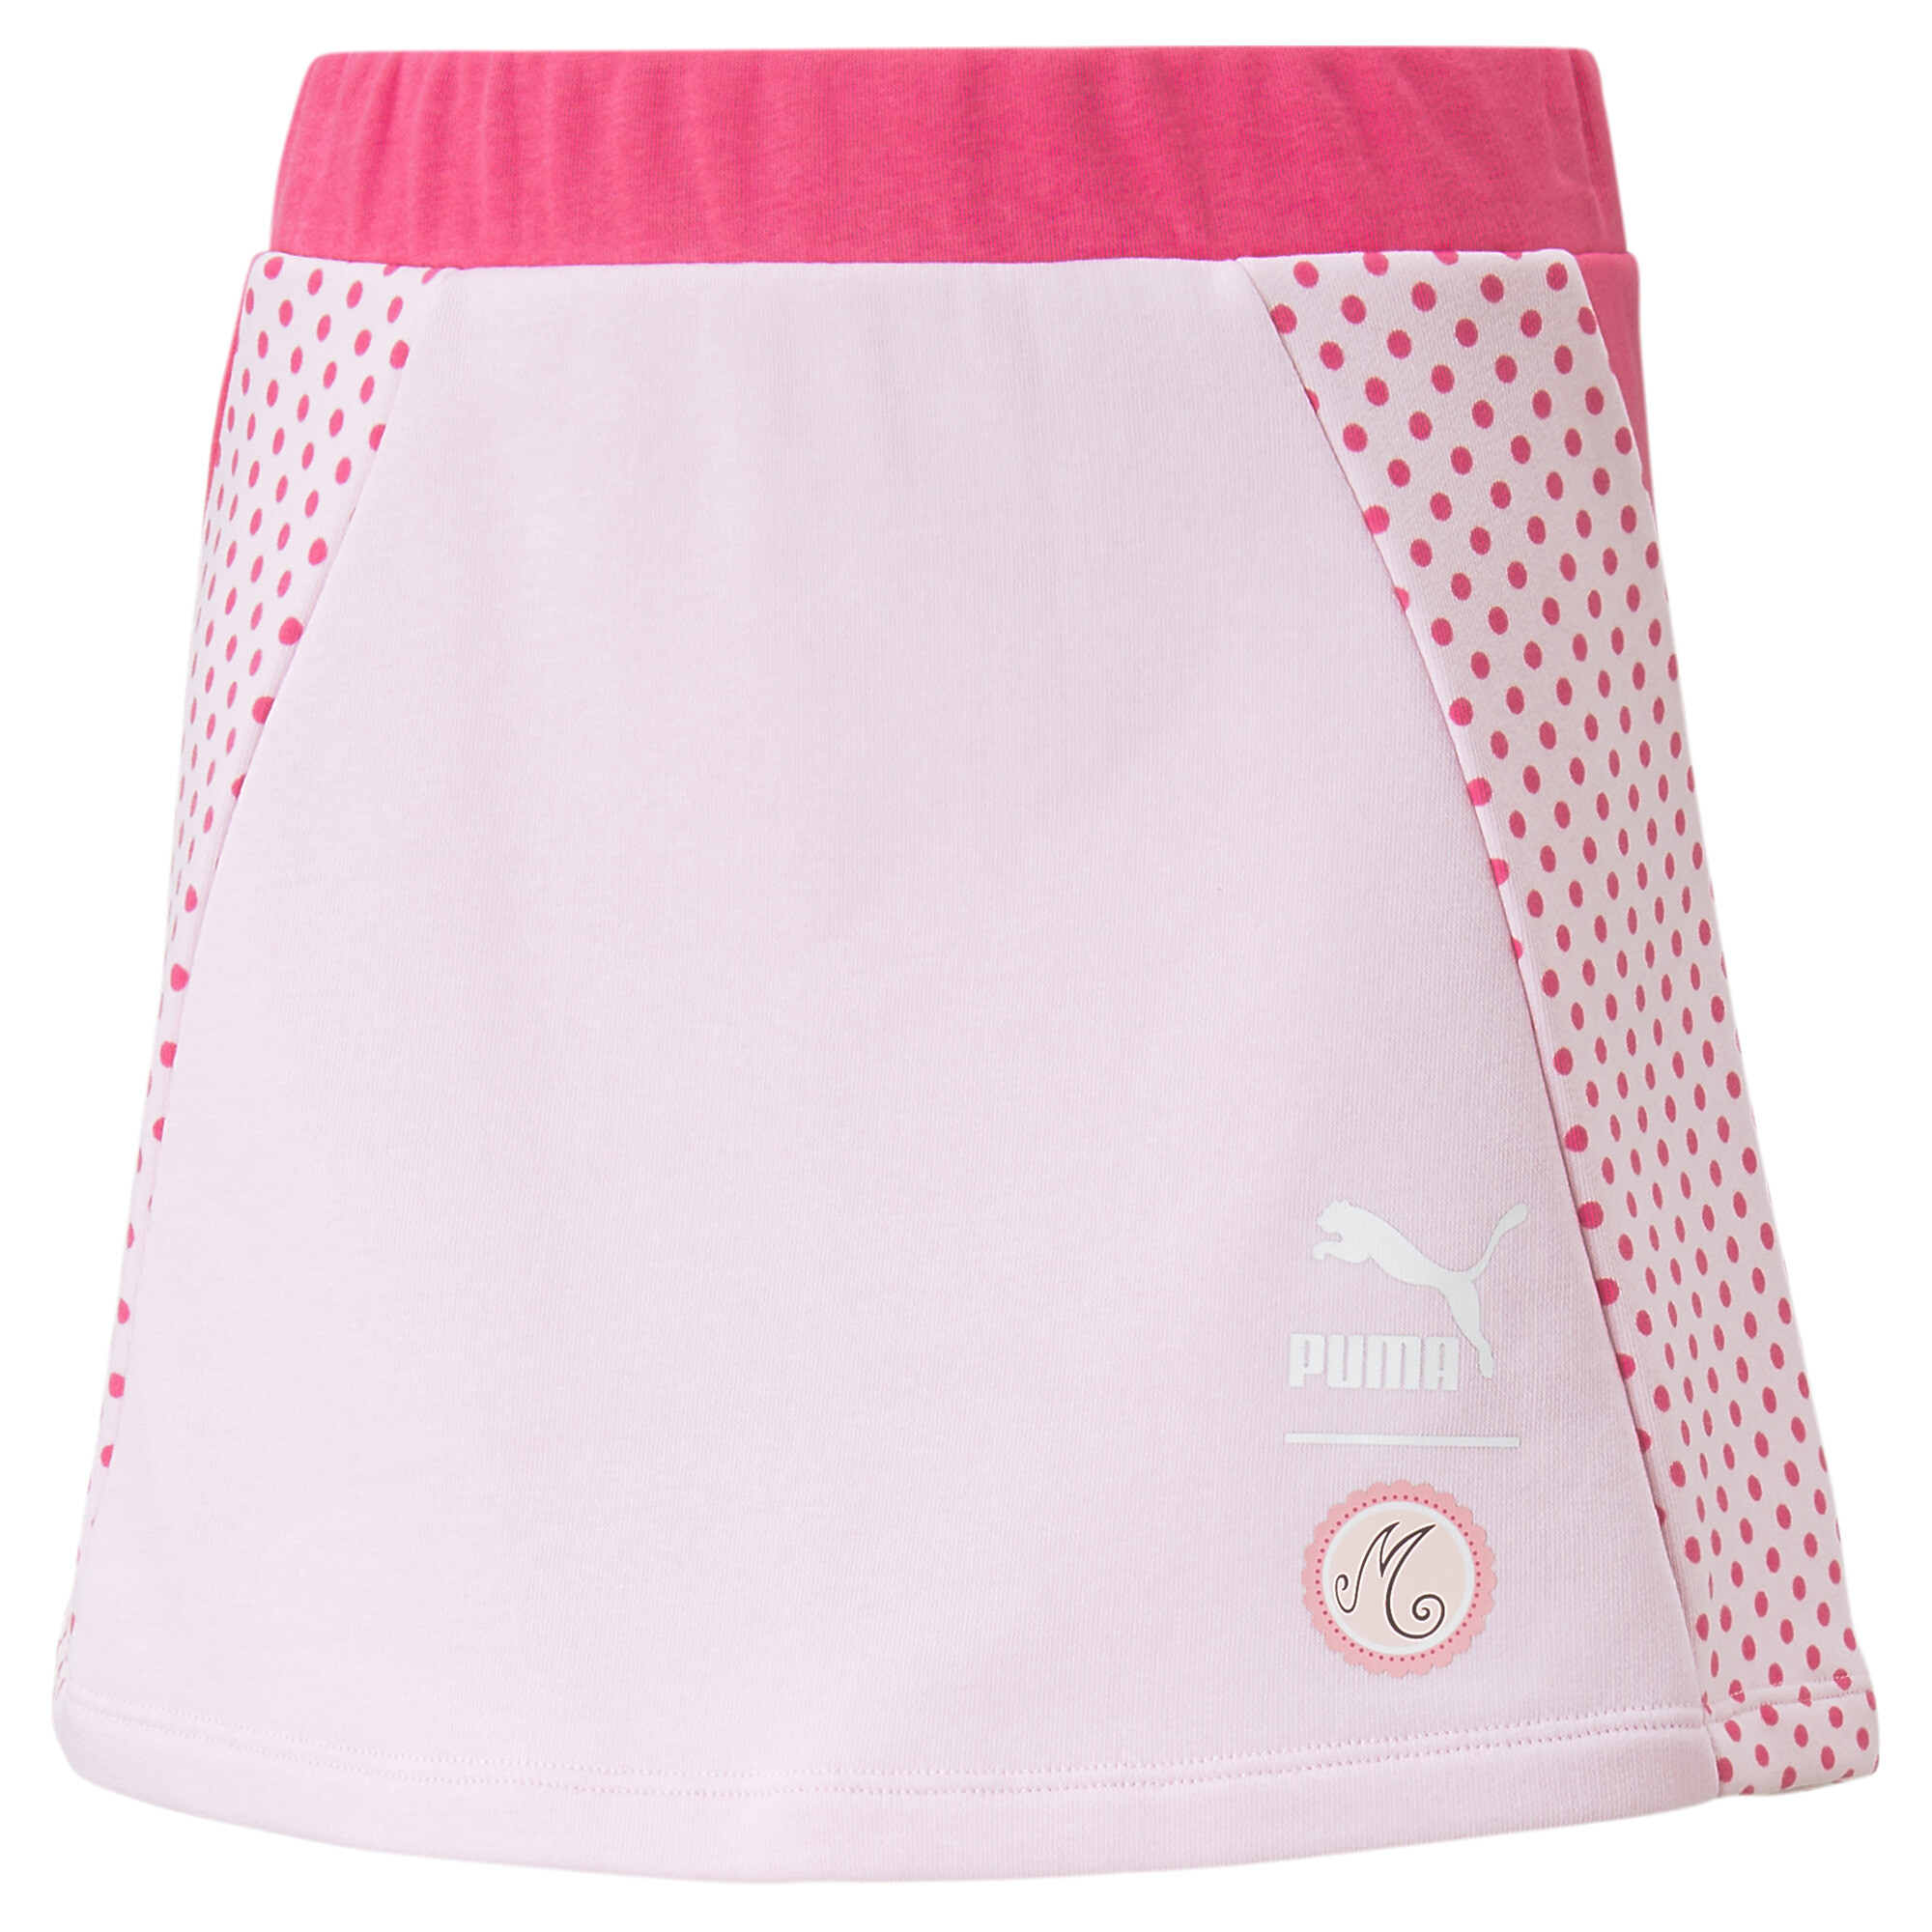 PUMA X MIRACULOUS Skirt In Pink, Size 9-10 Youth